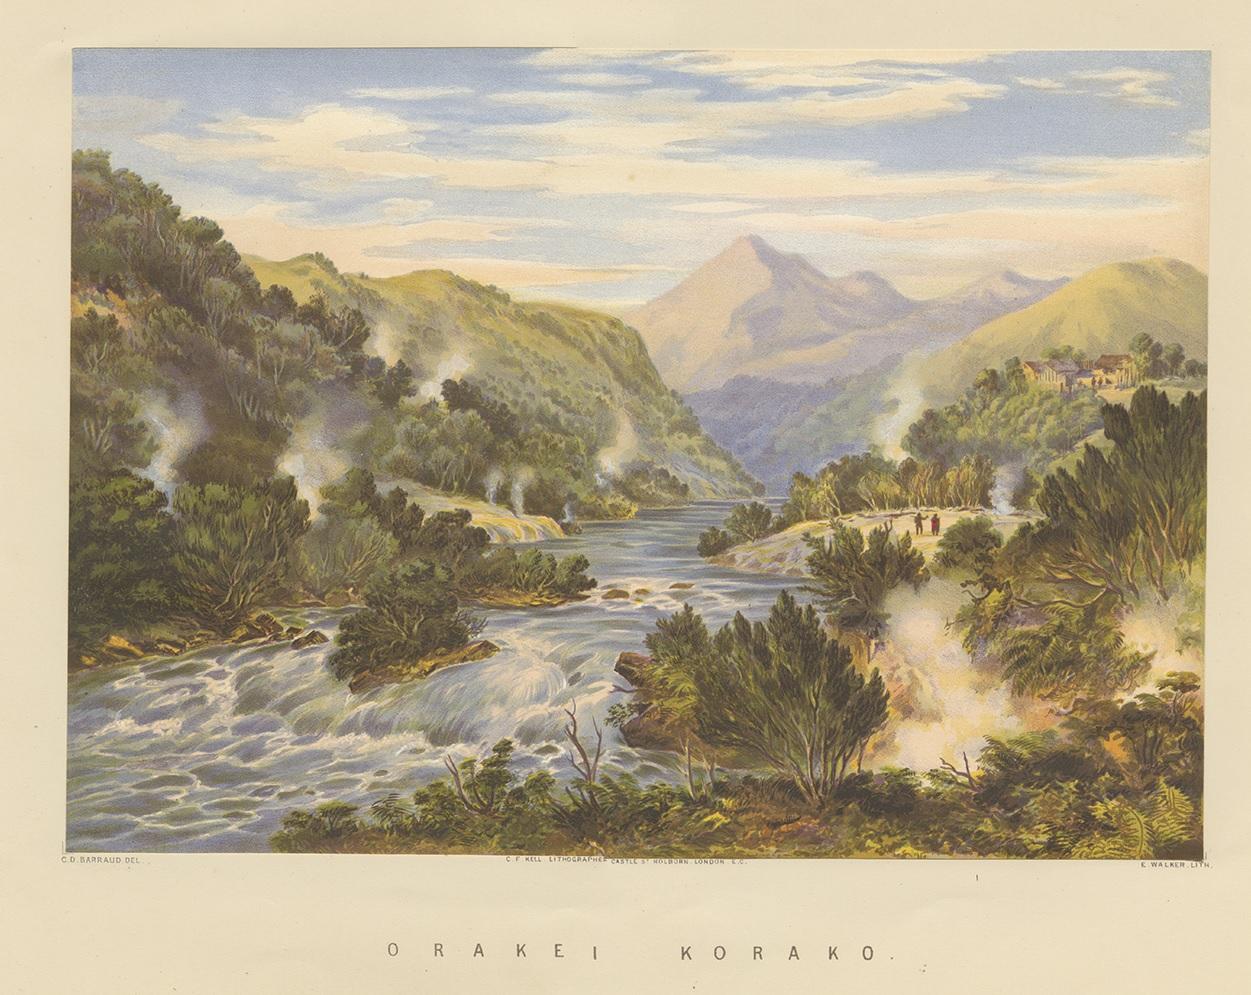 Antique print titled 'Orakei Korako'. View of Orakei Korako, a highly active geothermal area most notable for its series of fault-stepped sinter terraces, located in a valley north of Taupo on the banks of the Waikato River in the Taupo Volcanic